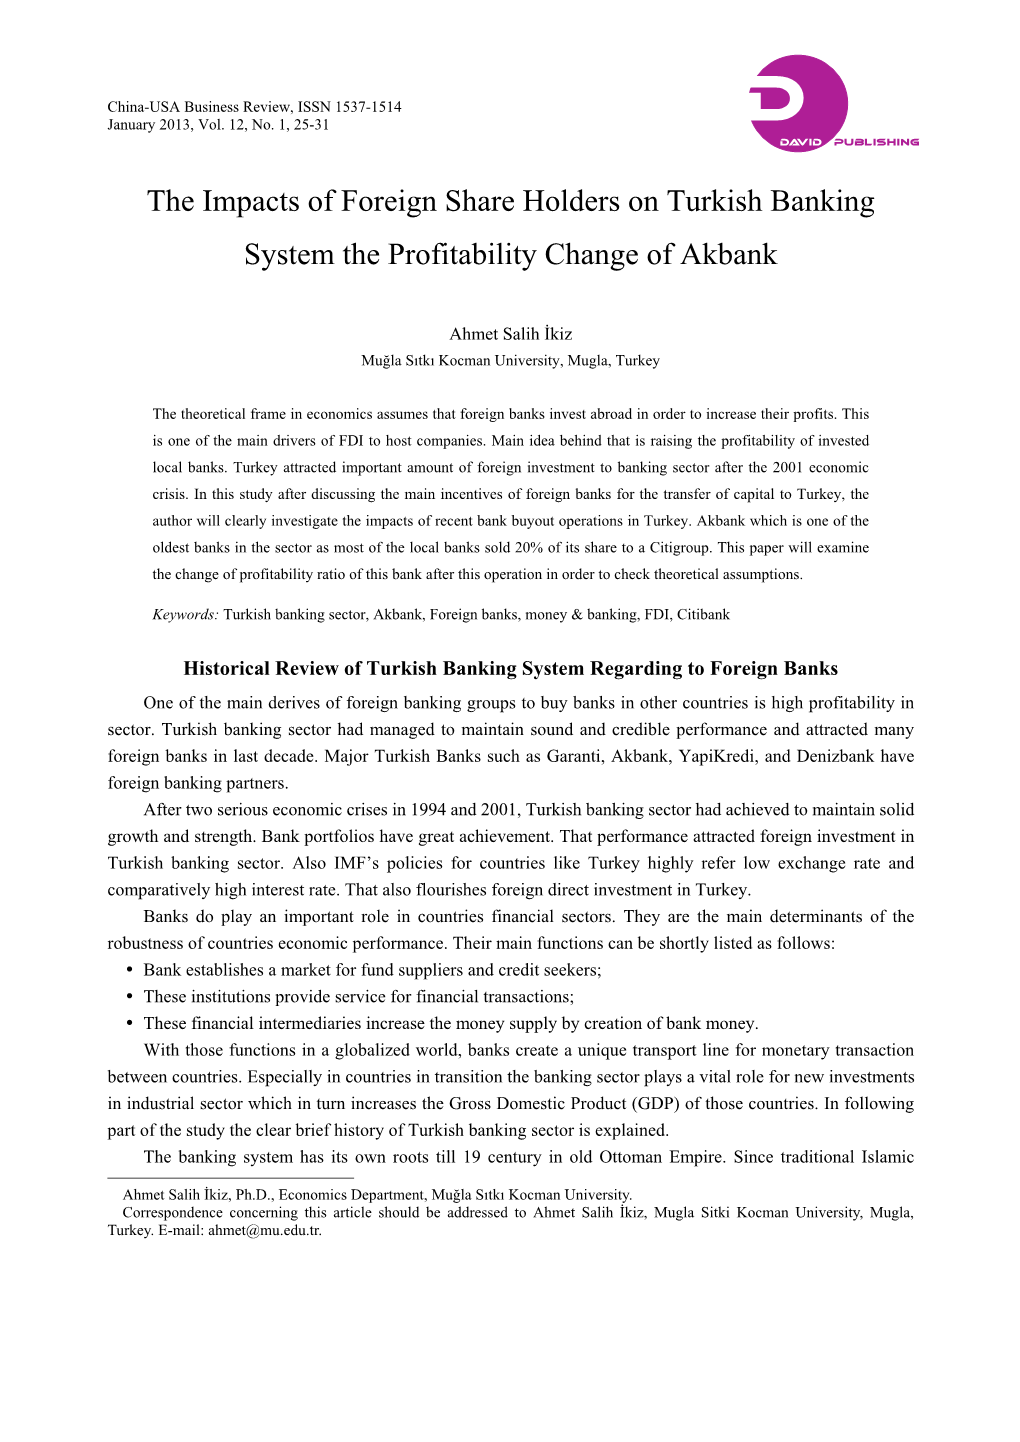 The Impacts of Foreign Share Holders on Turkish Banking System the Profitability Change of Akbank